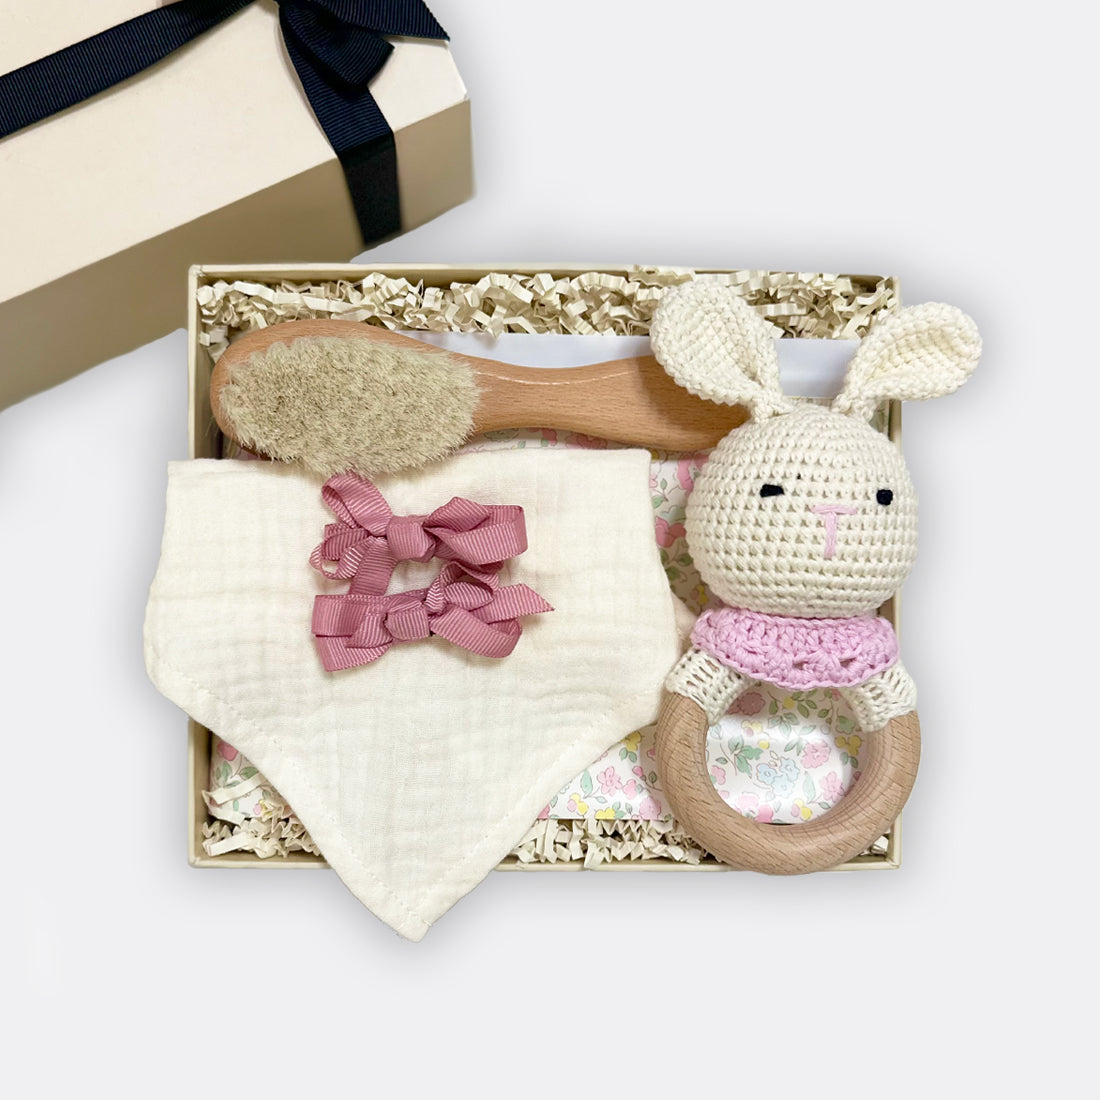 Bunny RaWipe Pouch Baby Brush Bow Hair clip Bandana Bib Off-White, shop the best gift gifts for her for him from Inna carton online store dubai, UAE!